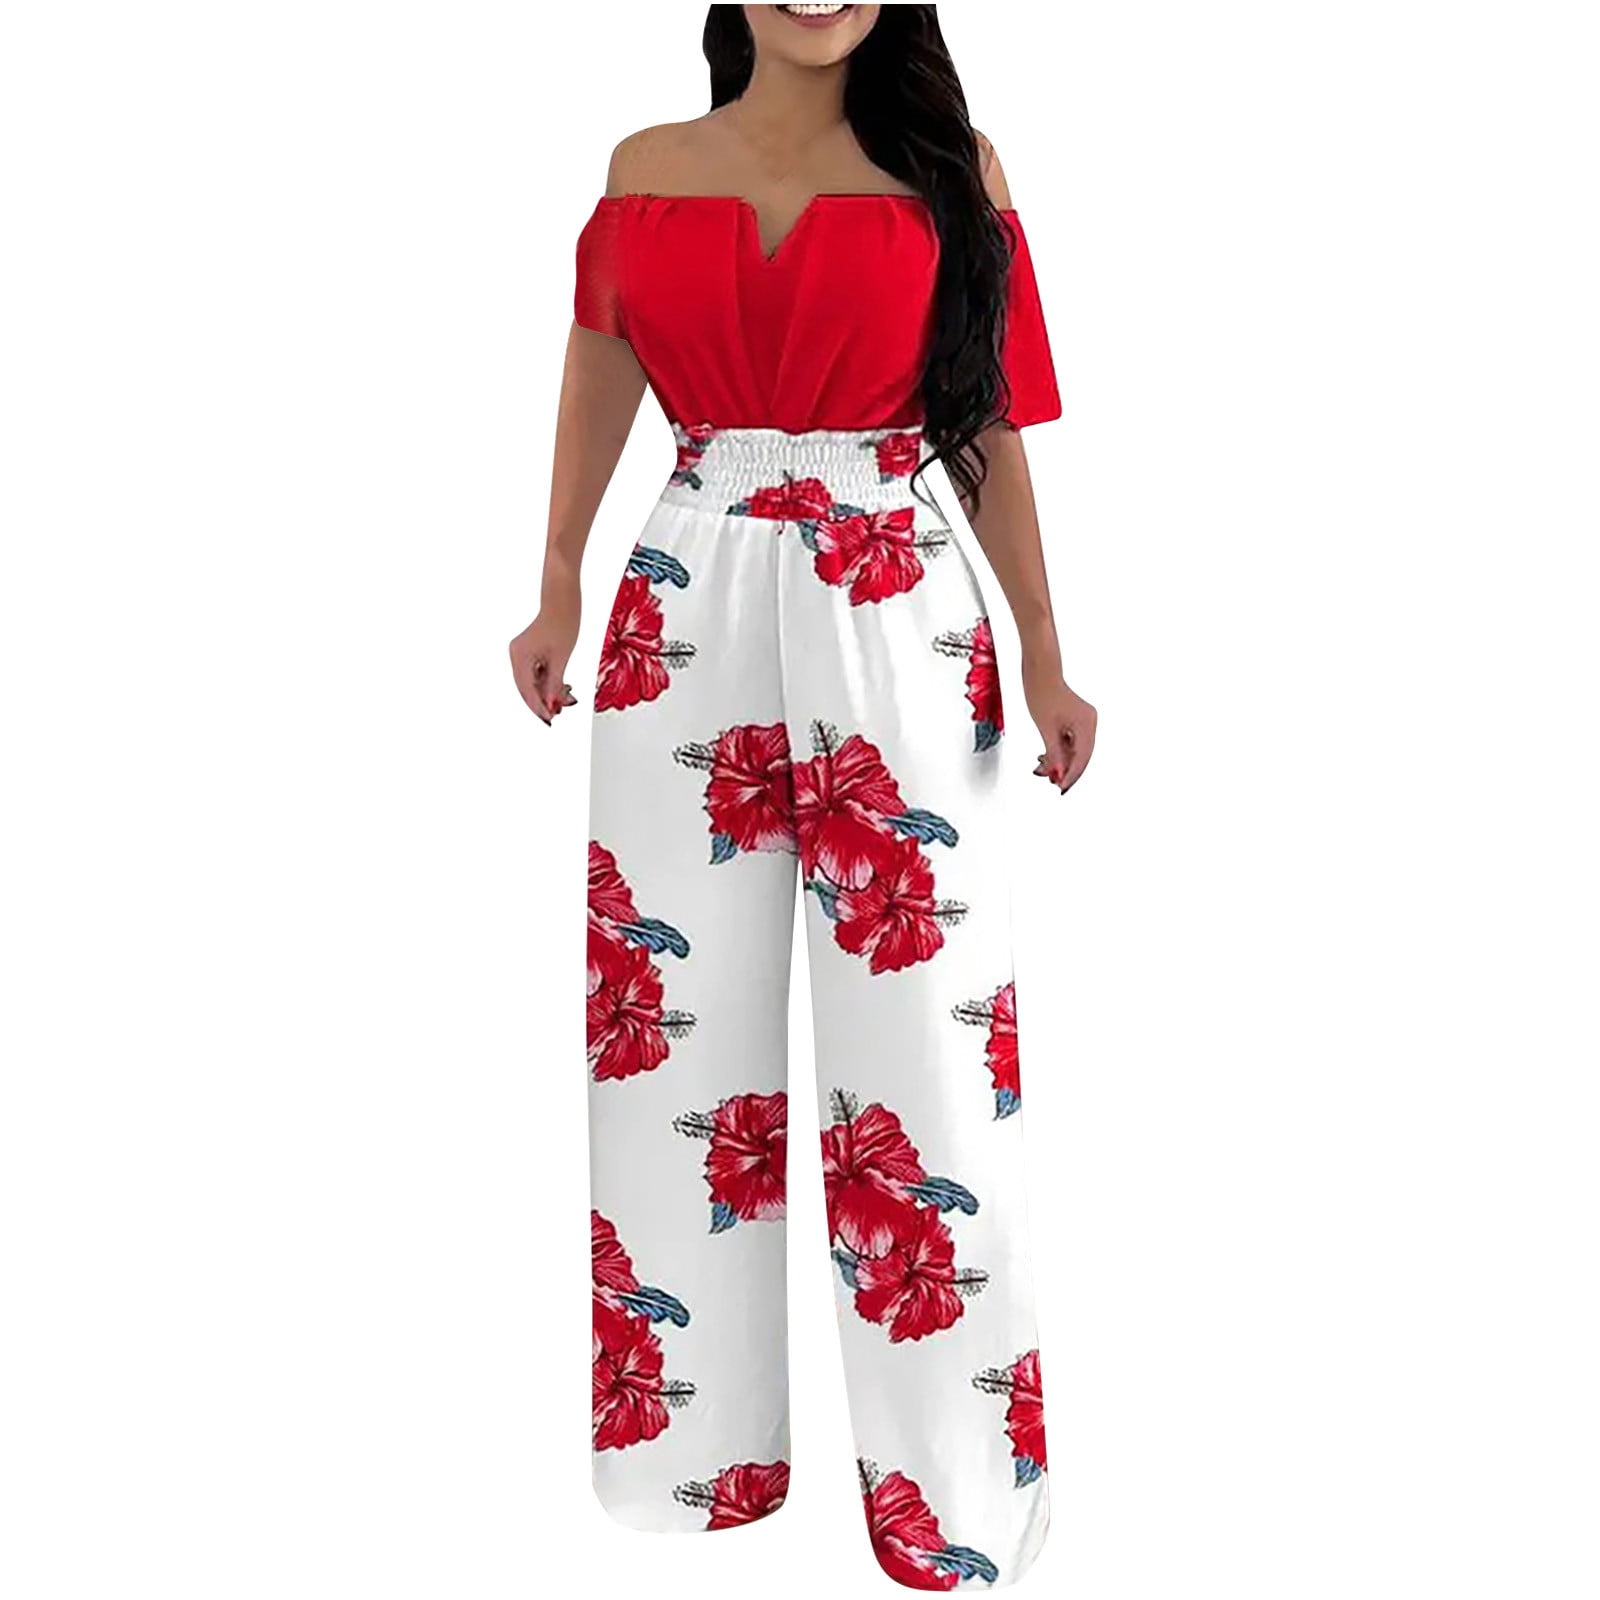 Tdoqot Women's Utility Jumpsuit- Summer and Fall Fashion Solid Color with  Pockets Casual Long Romper Jumpsuit Red Size L - Walmart.com